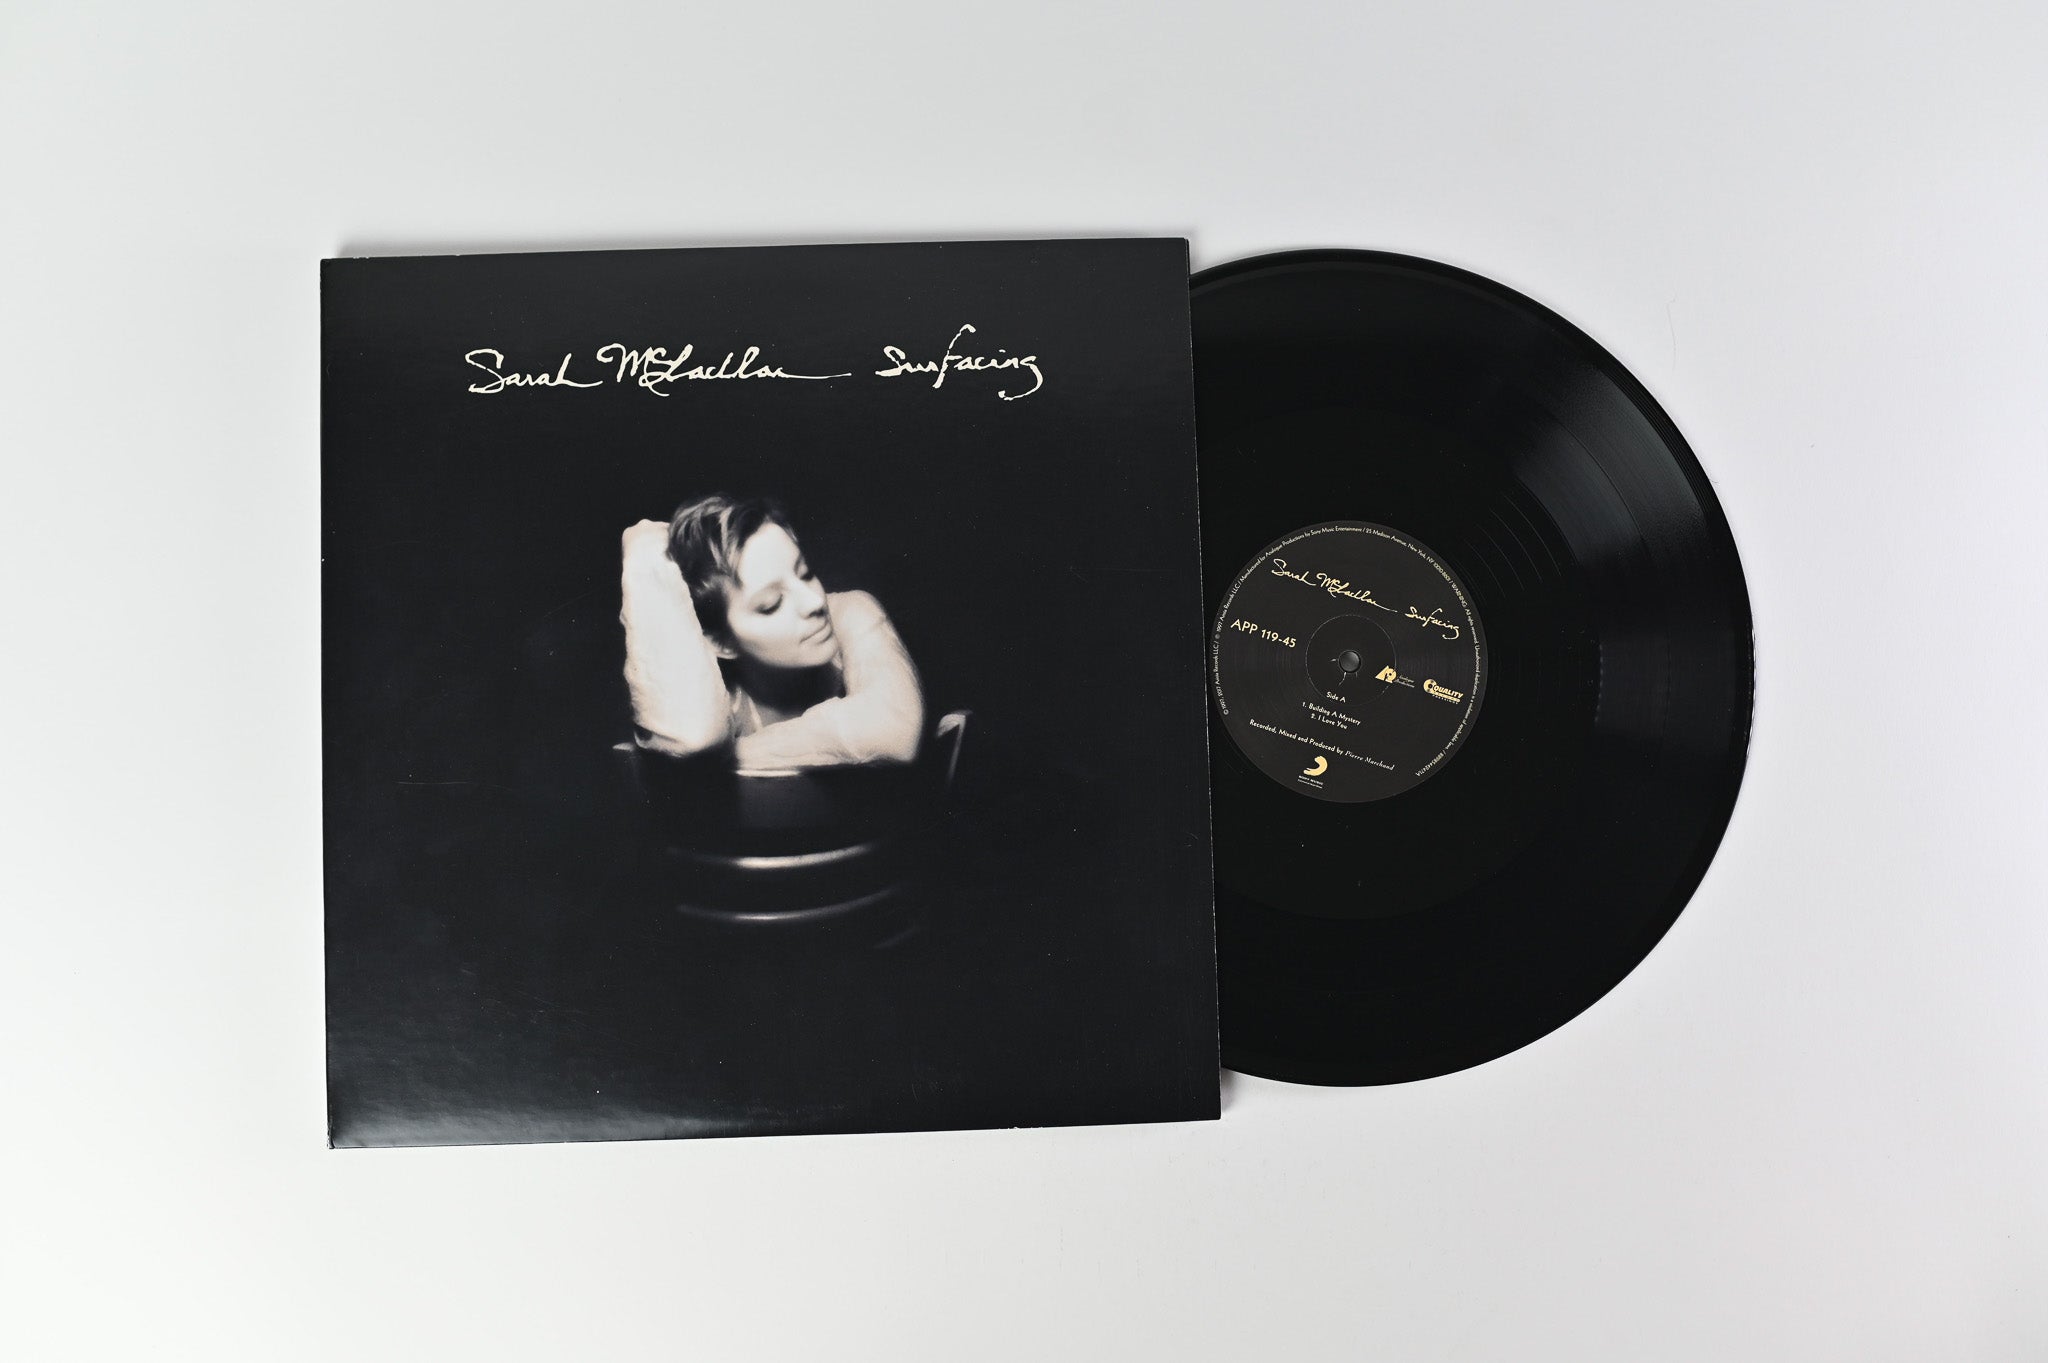 Sarah McLachlan - Surfacing on Analogue Productions 45 RPM Reissue